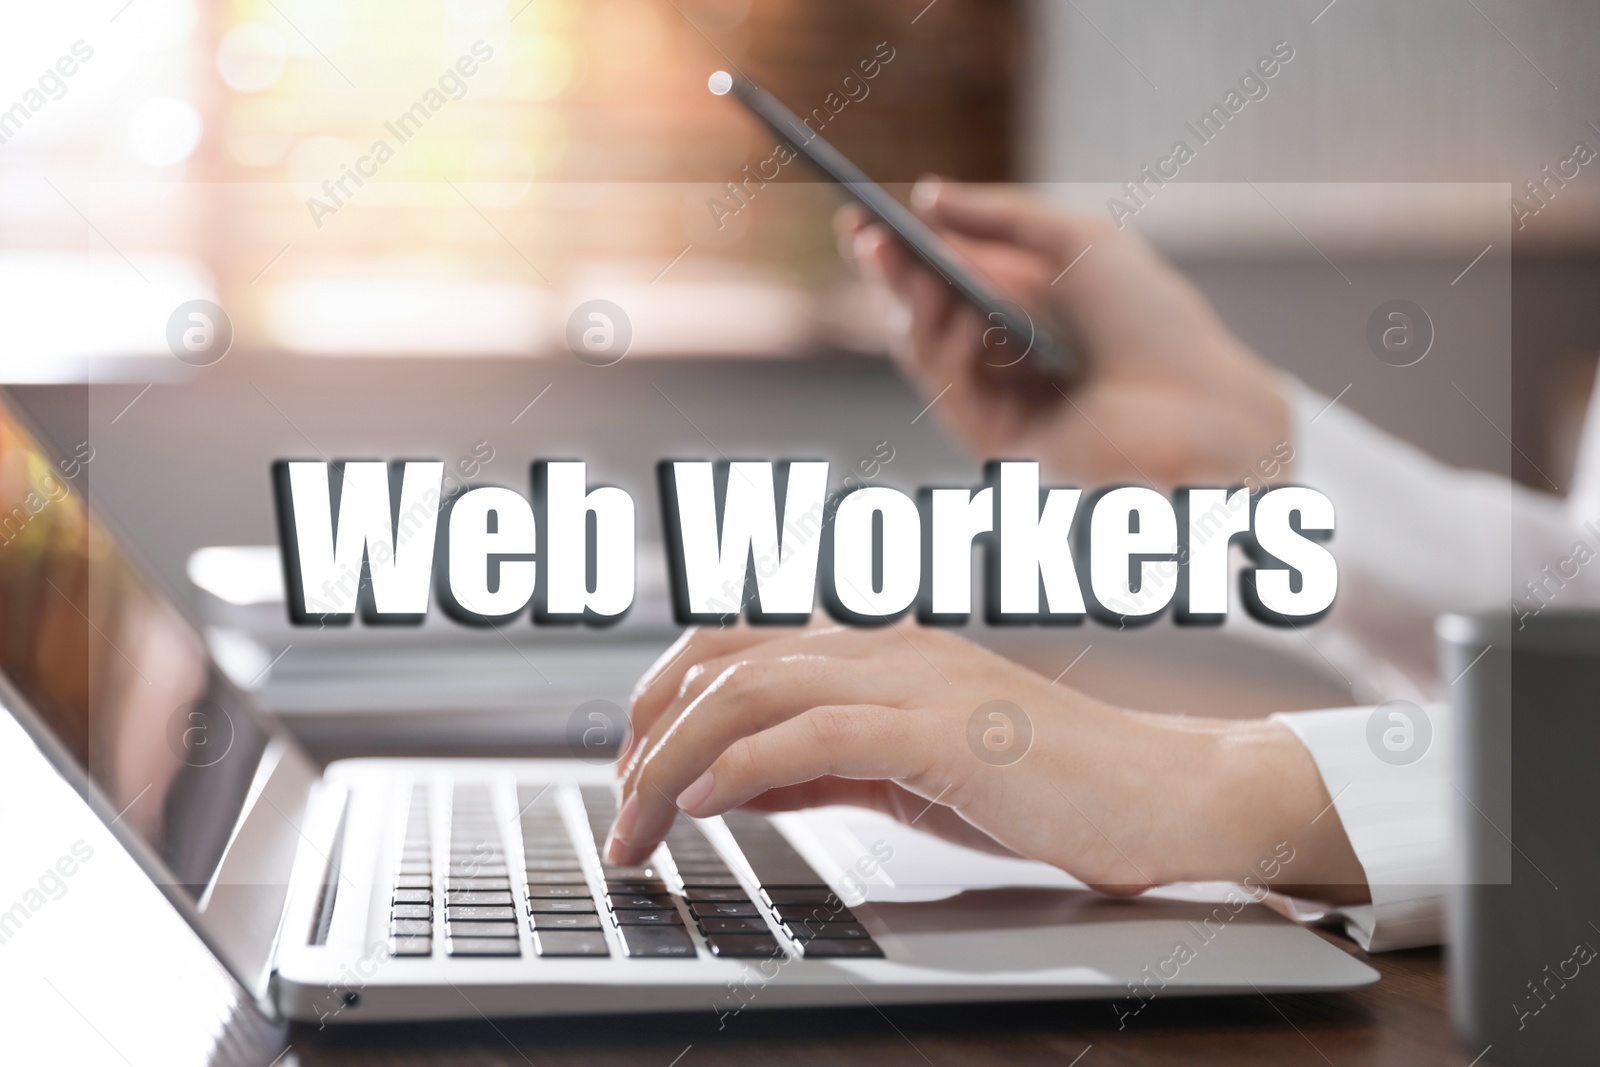 Image of Woman working with laptop at table in office, closeup. Web workers